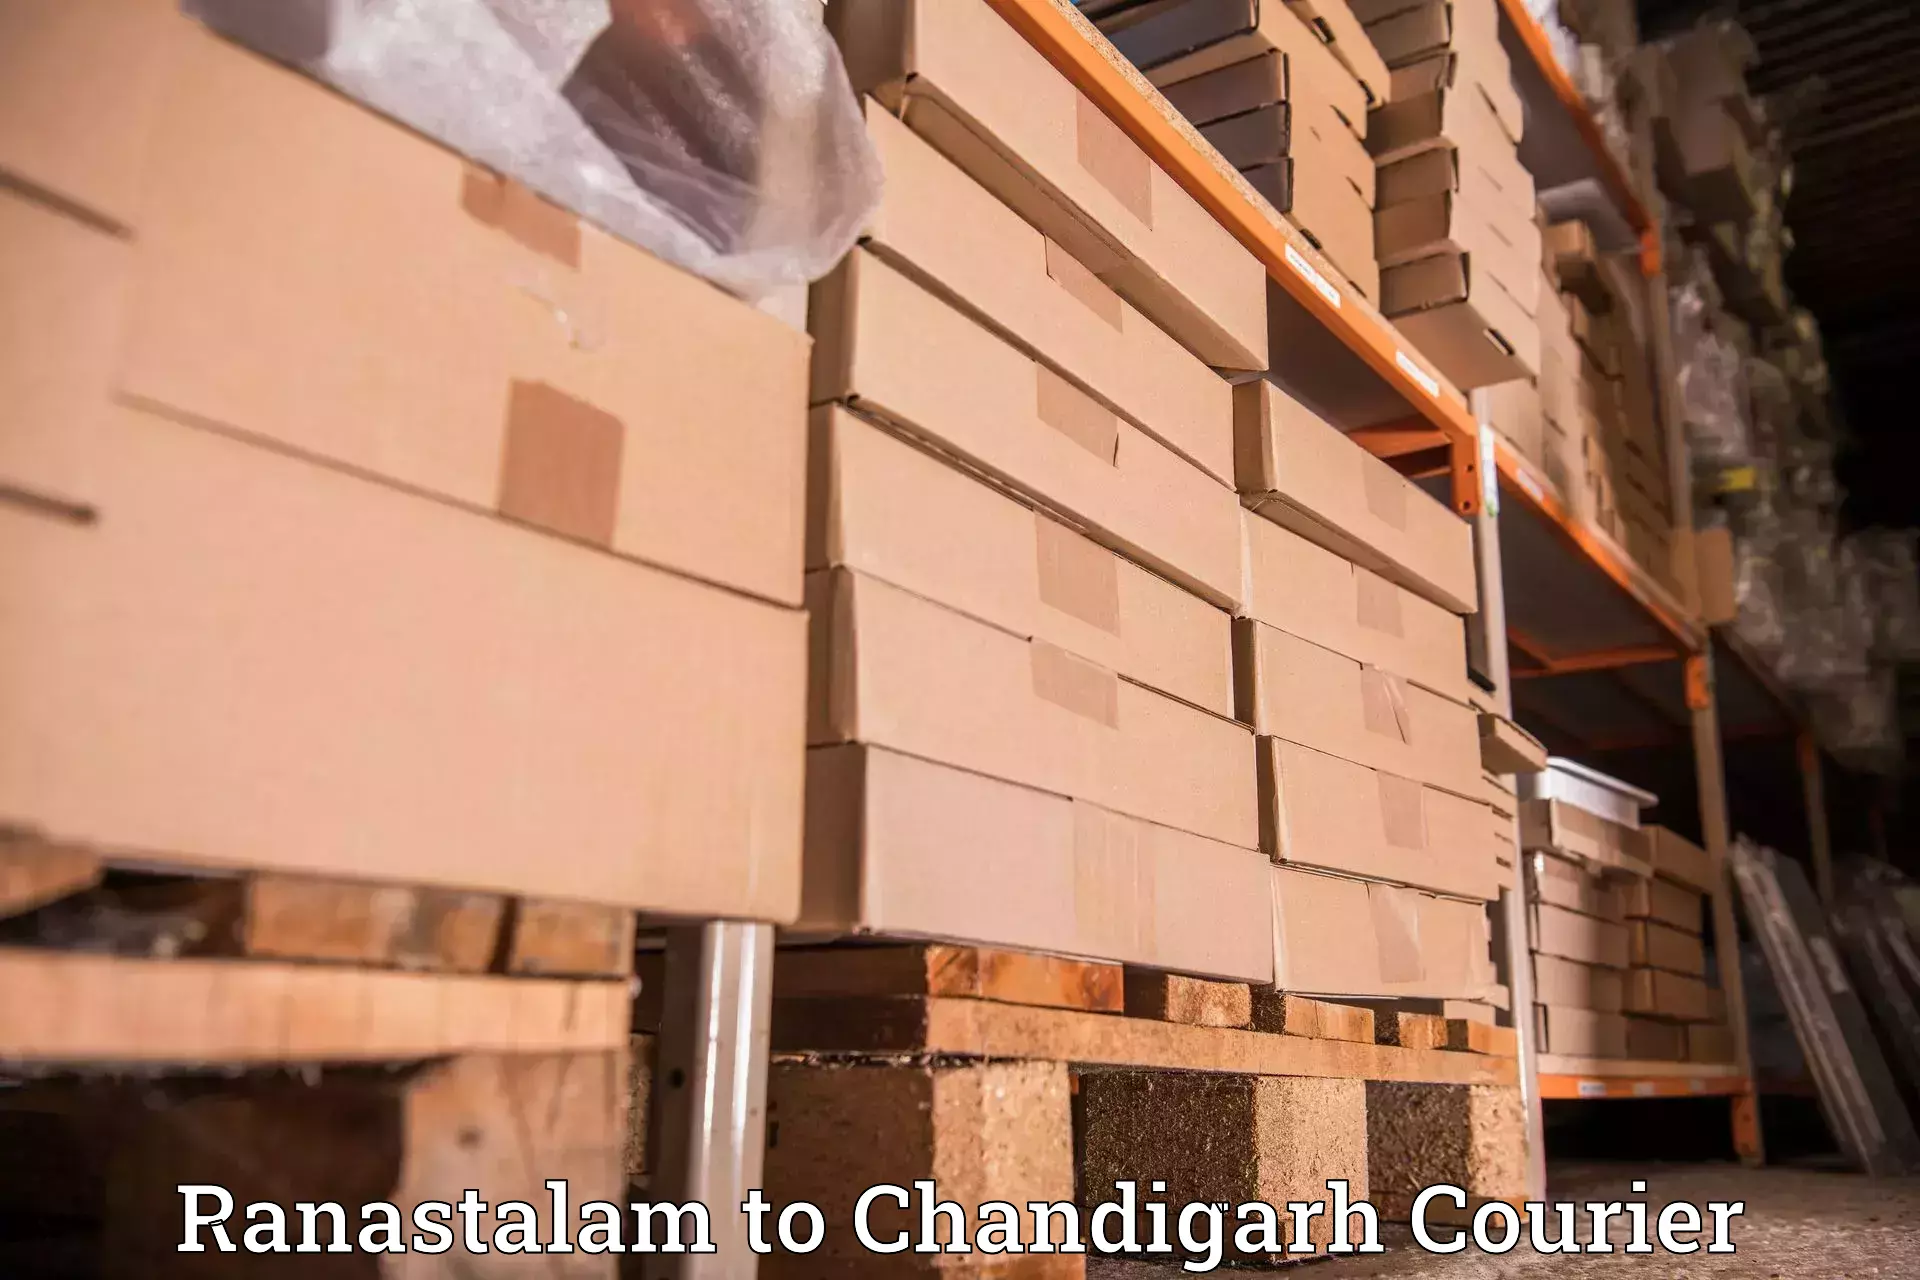 Local delivery service Ranastalam to Chandigarh